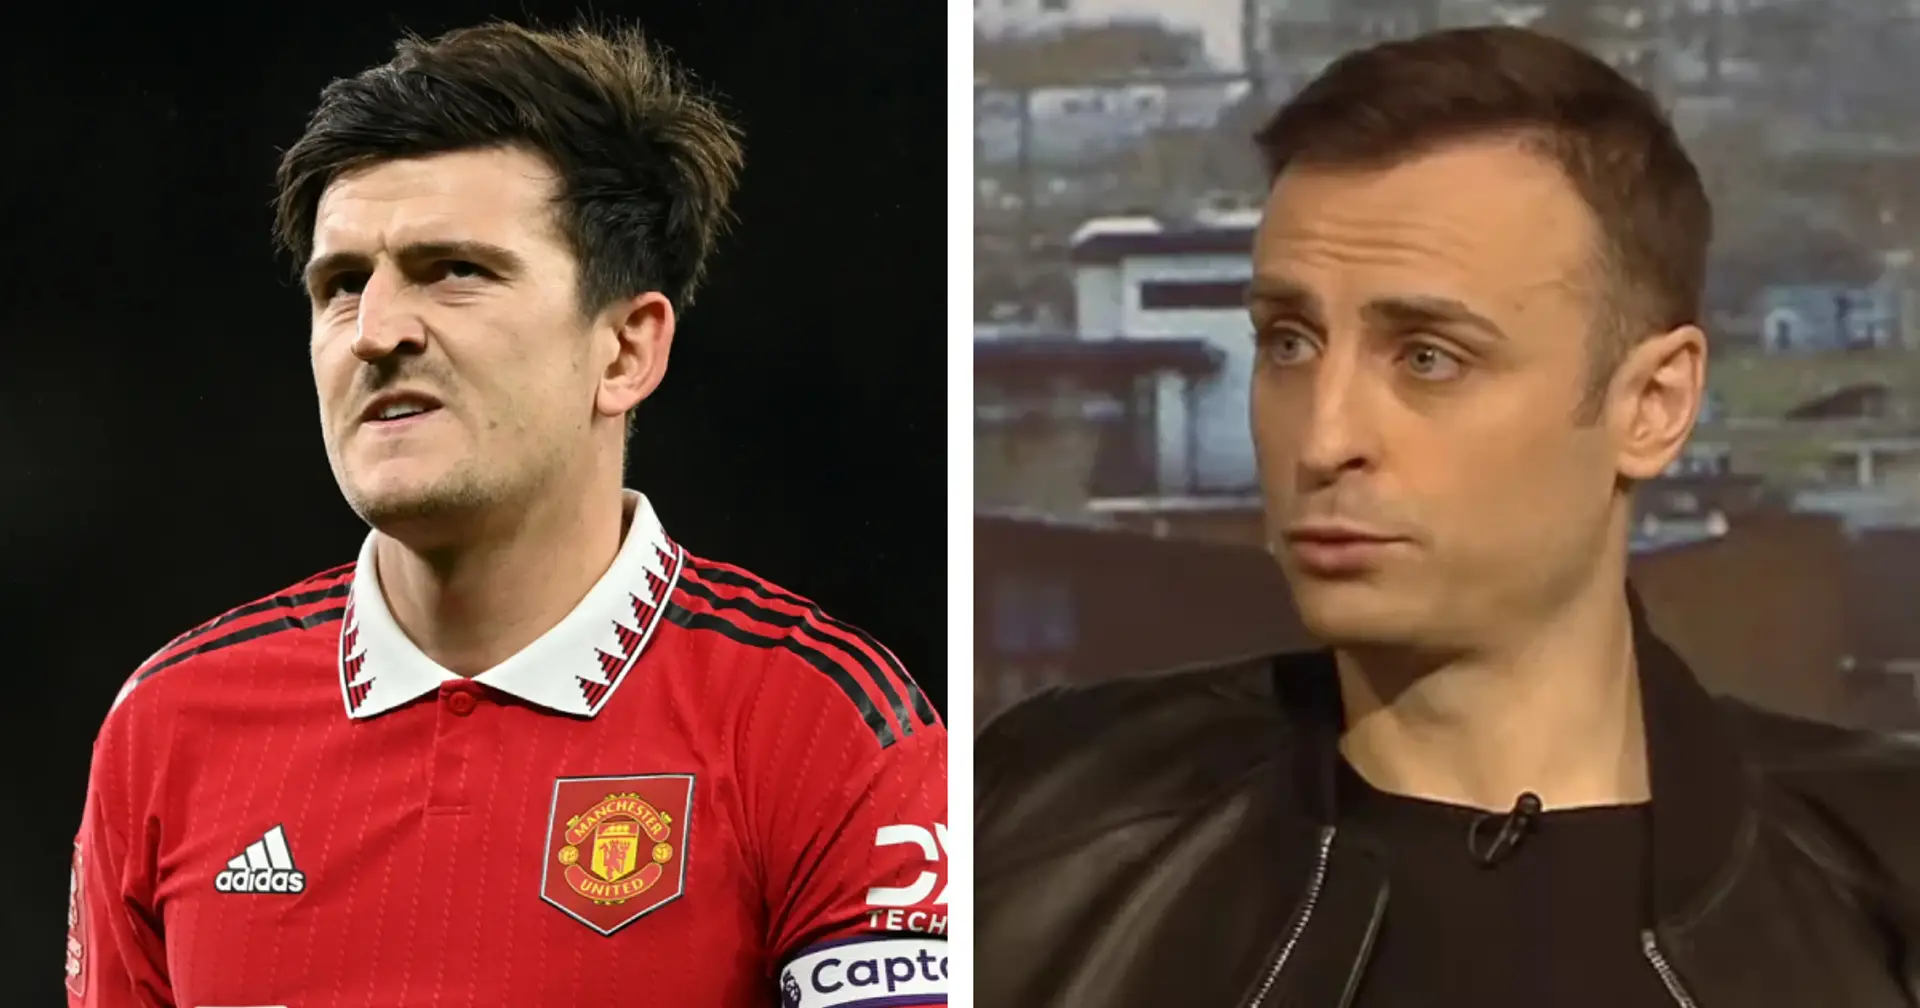 'When you're at Man United, you don't want to leave: Dimitar Berbatov shares his thoughts on Harry Maguire's future